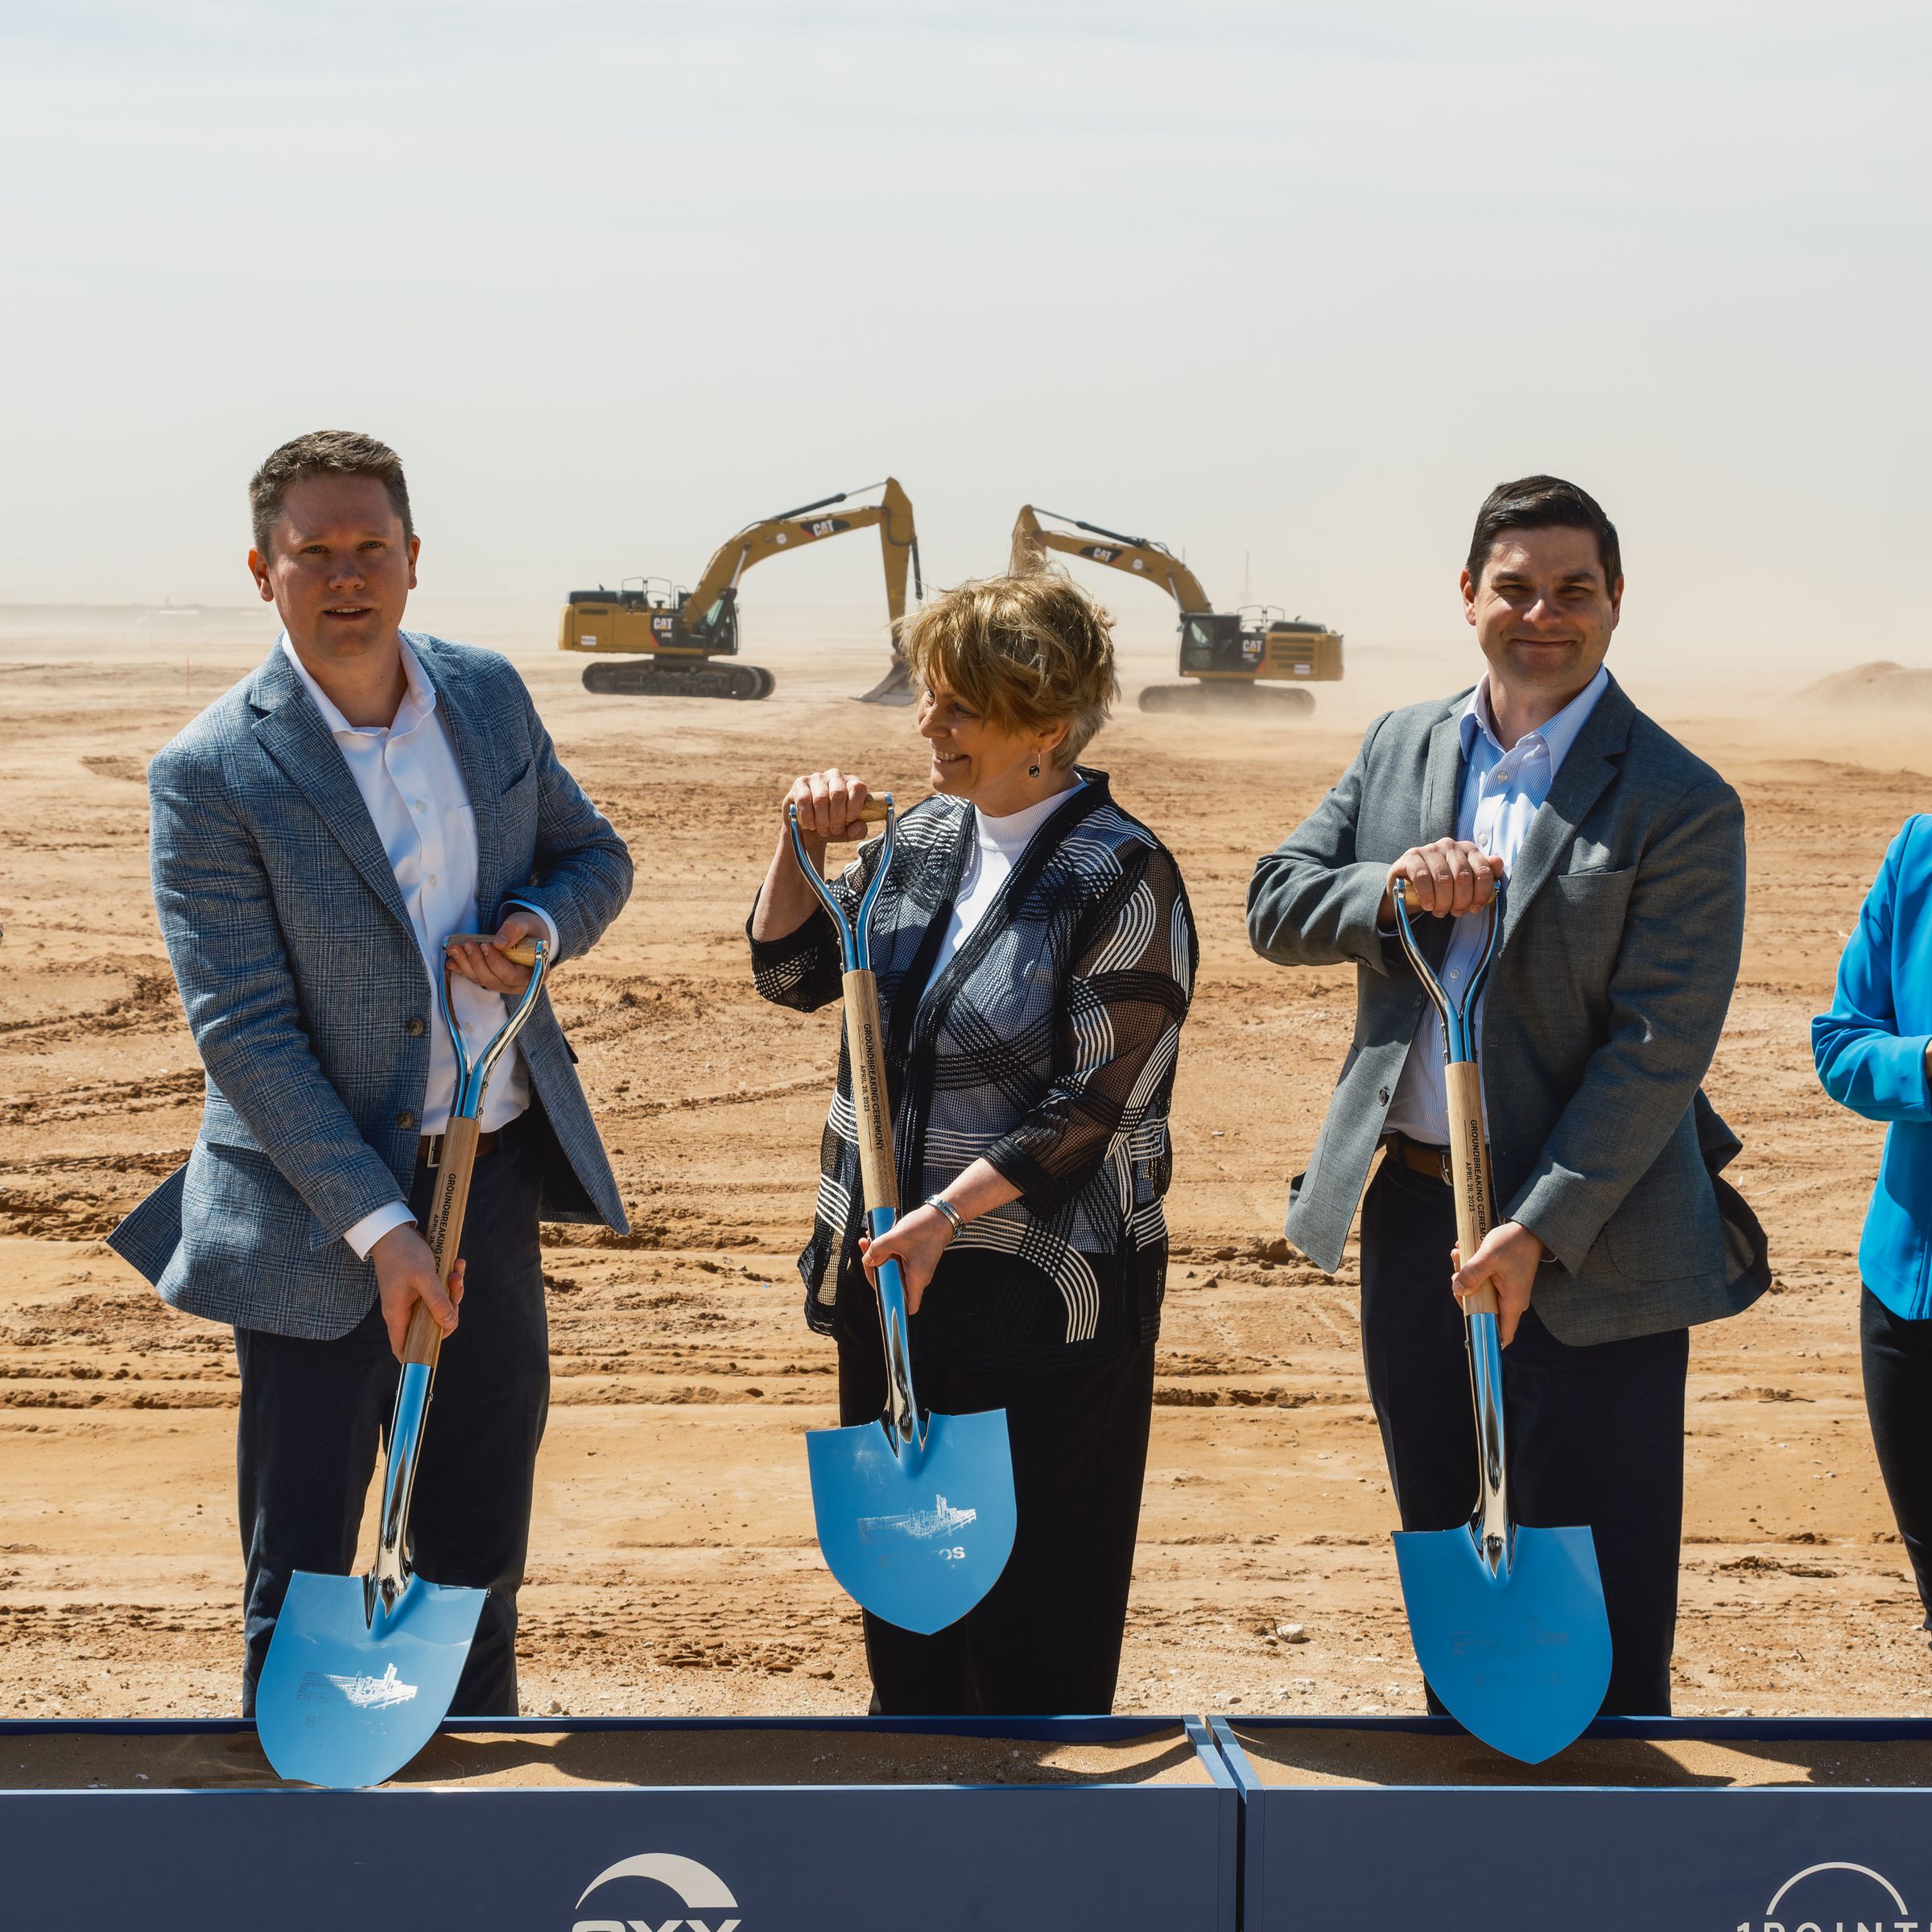 A row of people wearing suits hold up shovels at a construction site.